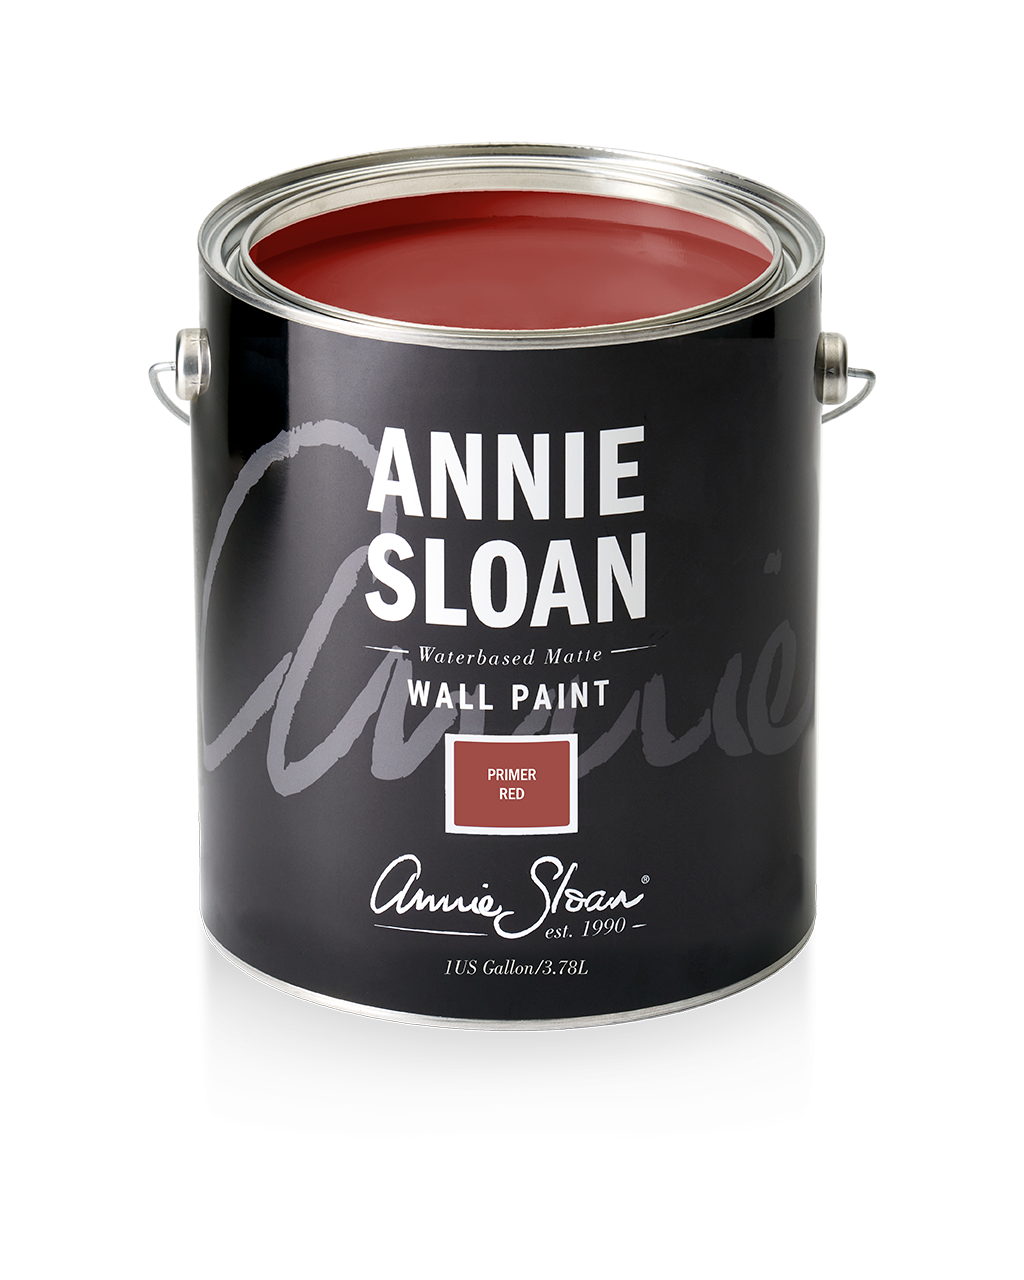 Wall Paint - Primer Red